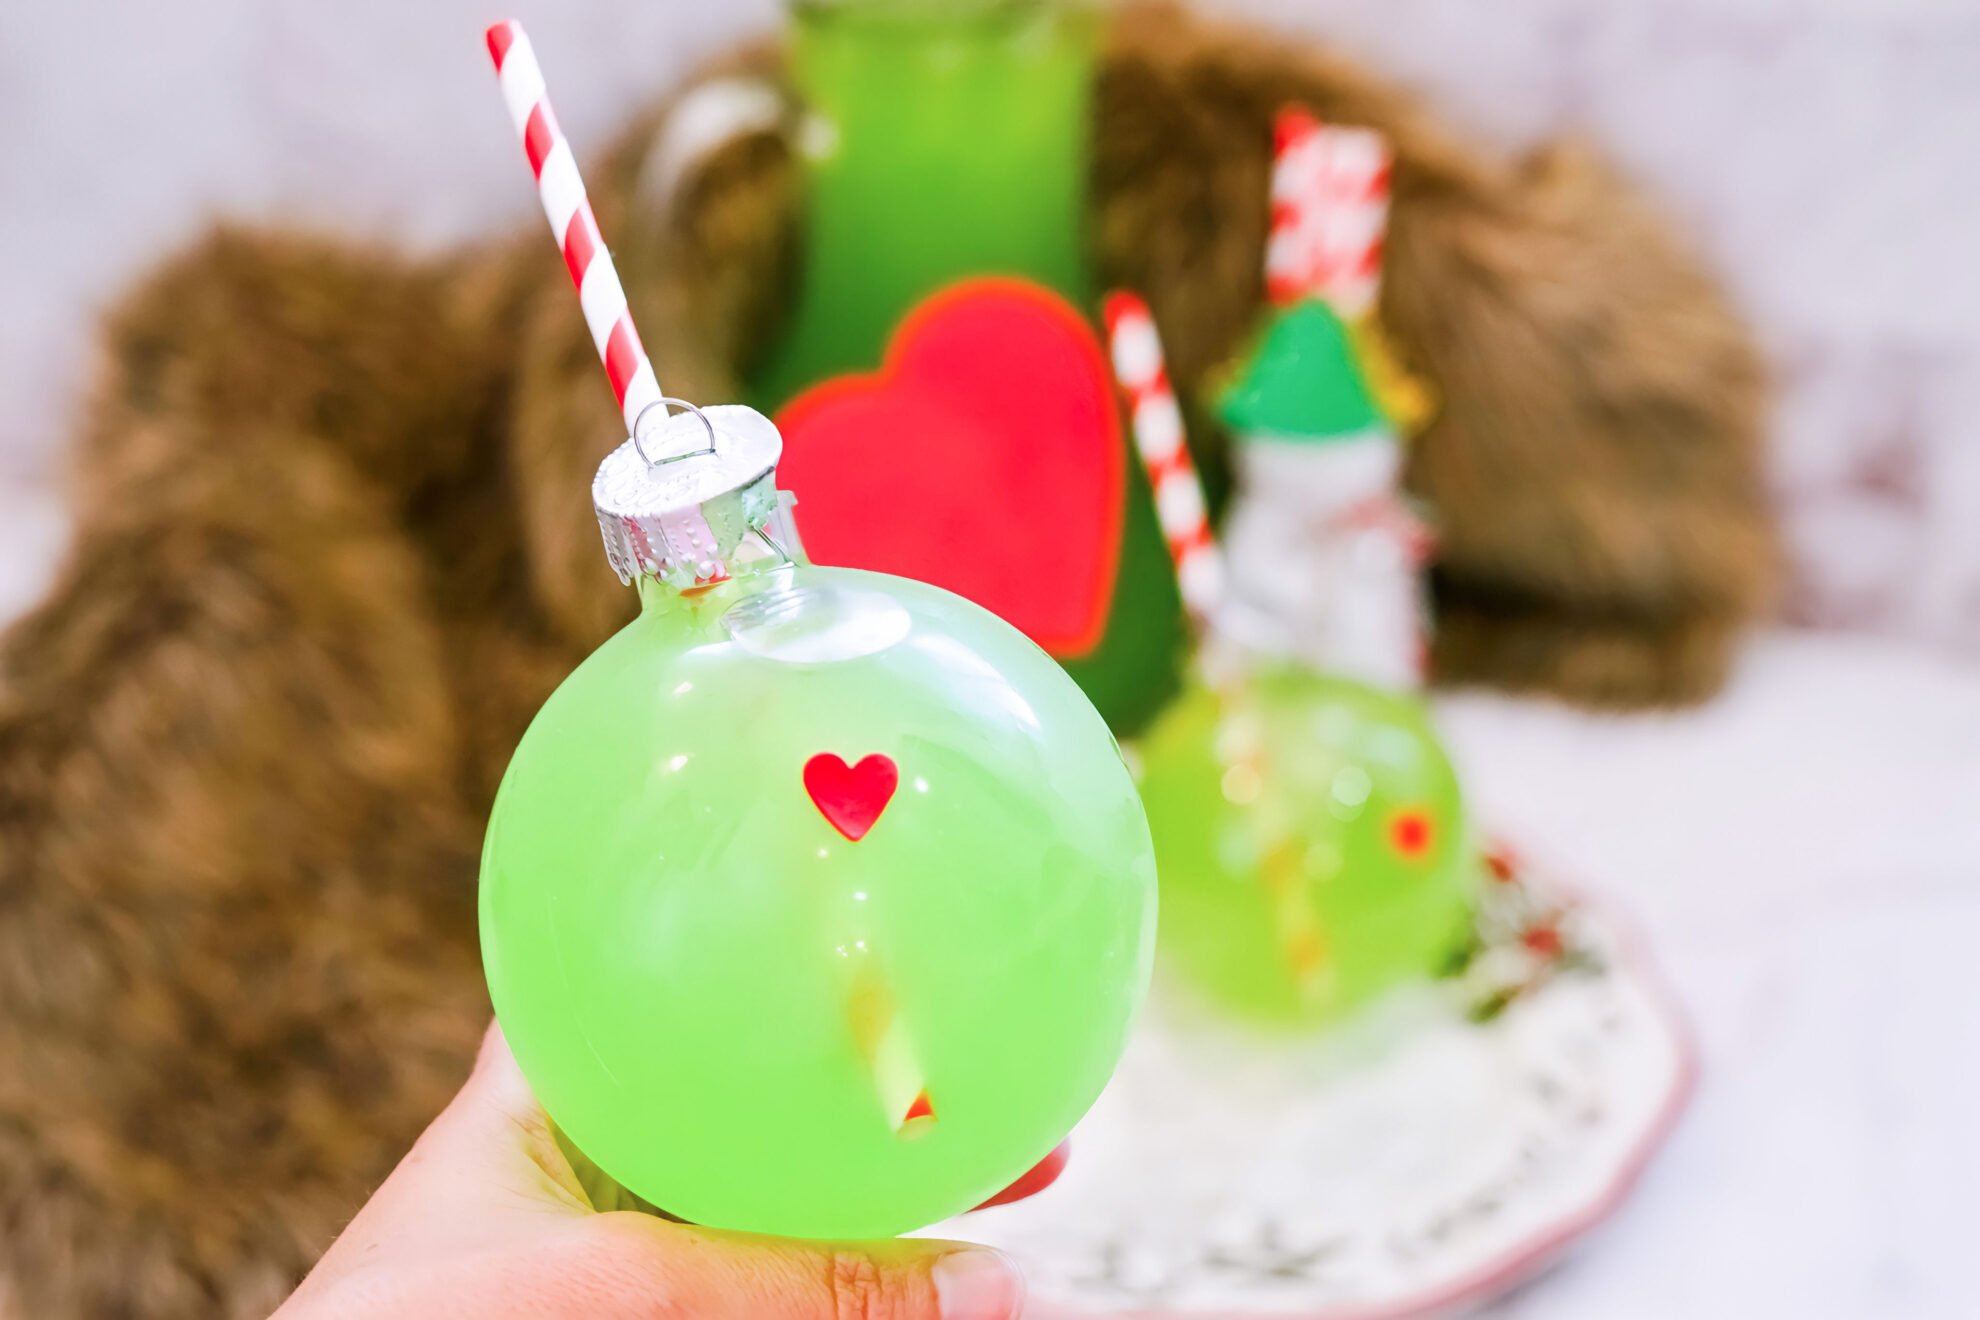 https://thriftyjinxy.com/wp-content/uploads/2022/12/Grinch-Punch-in-ornament-with-straw-1.jpg